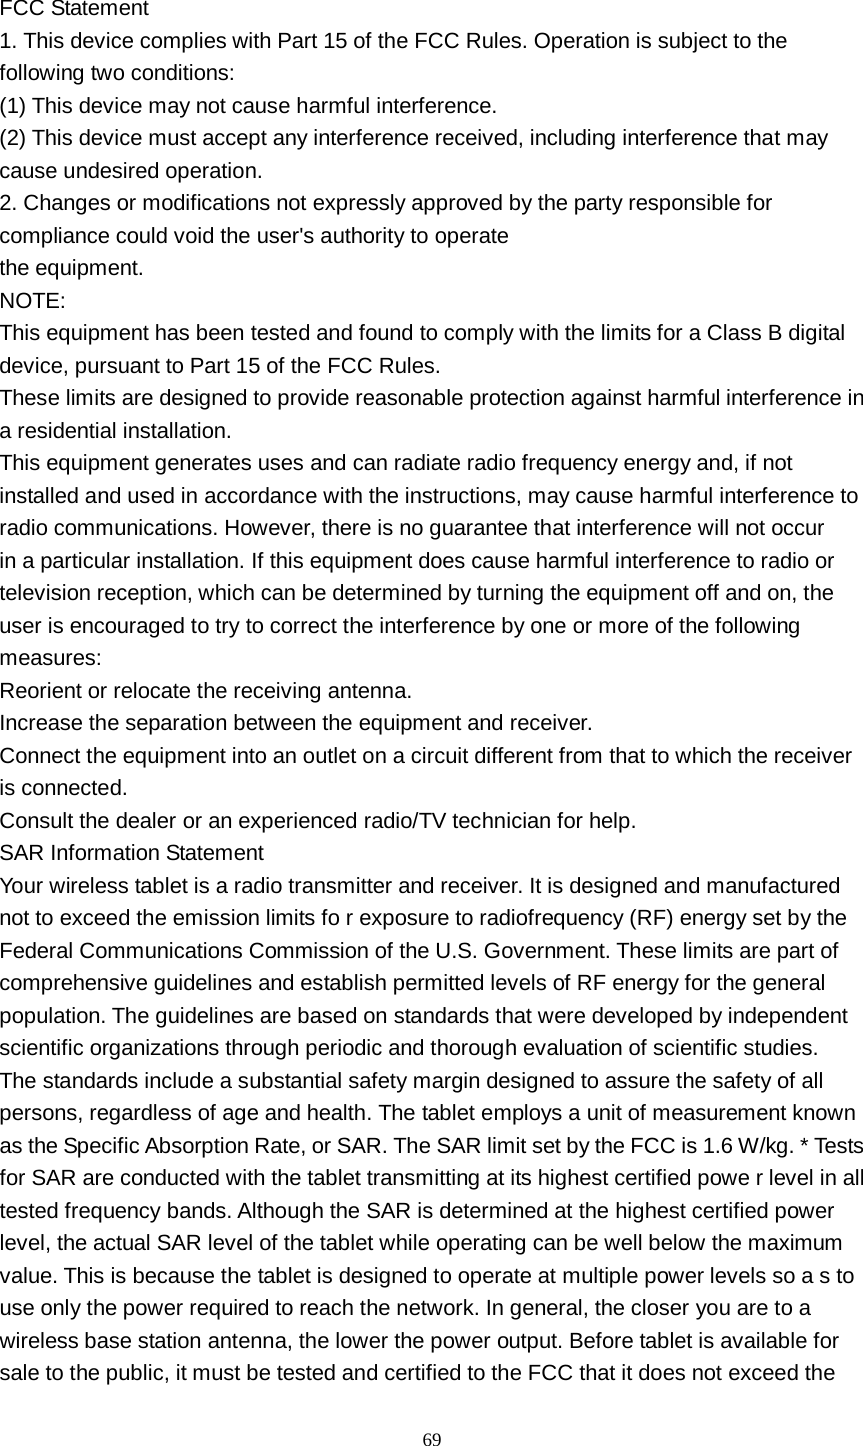      69  FCC Statement 1. This device complies with Part 15 of the FCC Rules. Operation is subject to the following two conditions: (1) This device may not cause harmful interference. (2) This device must accept any interference received, including interference that may cause undesired operation. 2. Changes or modifications not expressly approved by the party responsible for compliance could void the user&apos;s authority to operate the equipment. NOTE: This equipment has been tested and found to comply with the limits for a Class B digital device, pursuant to Part 15 of the FCC Rules. These limits are designed to provide reasonable protection against harmful interference in a residential installation. This equipment generates uses and can radiate radio frequency energy and, if not installed and used in accordance with the instructions, may cause harmful interference to radio communications. However, there is no guarantee that interference will not occur in a particular installation. If this equipment does cause harmful interference to radio or television reception, which can be determined by turning the equipment off and on, the user is encouraged to try to correct the interference by one or more of the following measures: Reorient or relocate the receiving antenna. Increase the separation between the equipment and receiver. Connect the equipment into an outlet on a circuit different from that to which the receiver is connected. Consult the dealer or an experienced radio/TV technician for help. SAR Information Statement Your wireless tablet is a radio transmitter and receiver. It is designed and manufactured not to exceed the emission limits fo r exposure to radiofrequency (RF) energy set by the Federal Communications Commission of the U.S. Government. These limits are part of comprehensive guidelines and establish permitted levels of RF energy for the general population. The guidelines are based on standards that were developed by independent scientific organizations through periodic and thorough evaluation of scientific studies. The standards include a substantial safety margin designed to assure the safety of all persons, regardless of age and health. The tablet employs a unit of measurement known as the Specific Absorption Rate, or SAR. The SAR limit set by the FCC is 1.6 W/kg. * Tests for SAR are conducted with the tablet transmitting at its highest certified powe r level in all tested frequency bands. Although the SAR is determined at the highest certified power level, the actual SAR level of the tablet while operating can be well below the maximum value. This is because the tablet is designed to operate at multiple power levels so a s to use only the power required to reach the network. In general, the closer you are to a wireless base station antenna, the lower the power output. Before tablet is available for sale to the public, it must be tested and certified to the FCC that it does not exceed the 